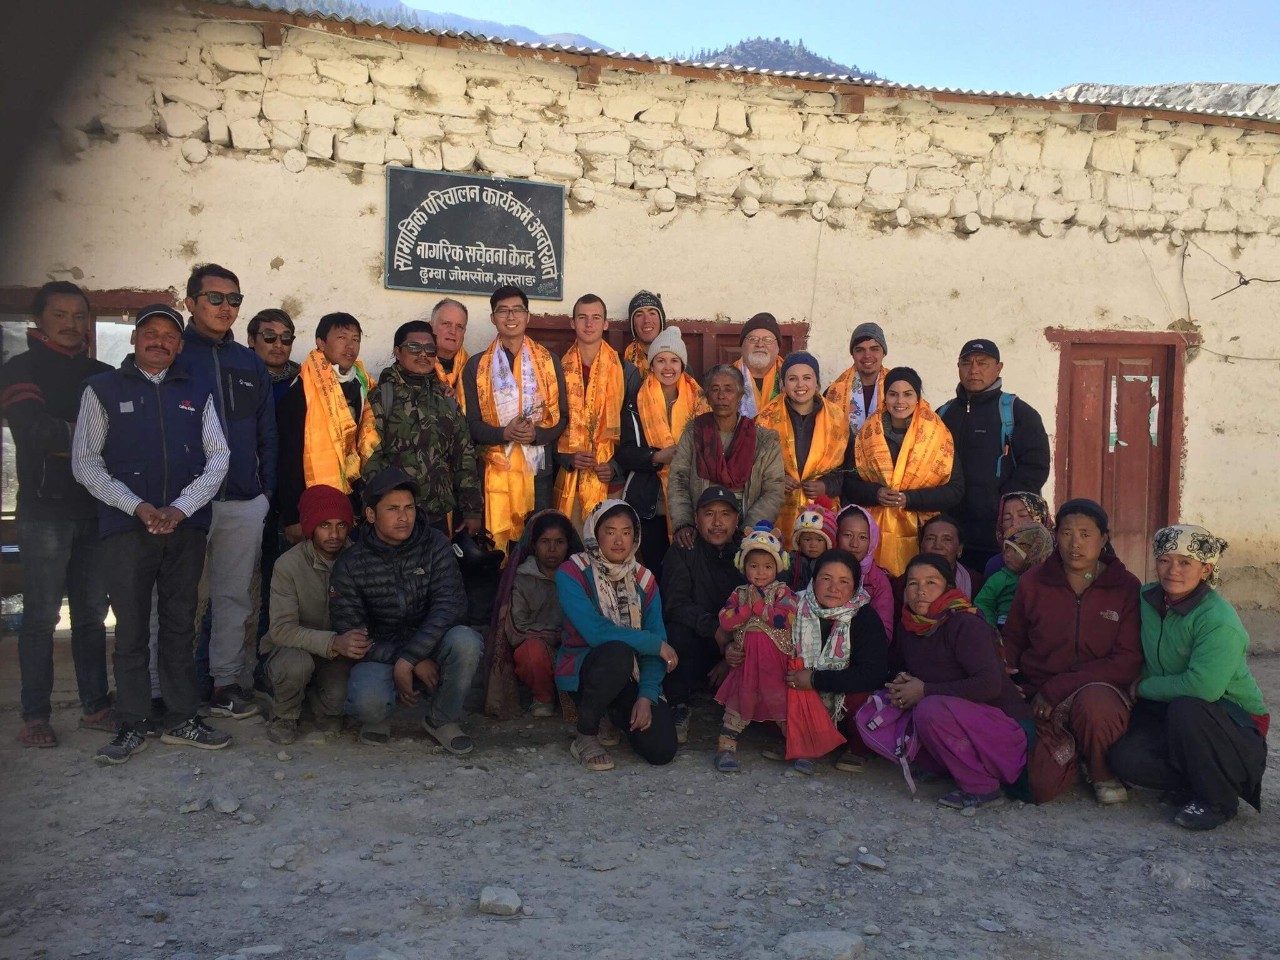 VT's Service Without Borders team (Winter of 2017-18) with villagers of Dhumba. Photo submitted by Mark Shepheard.